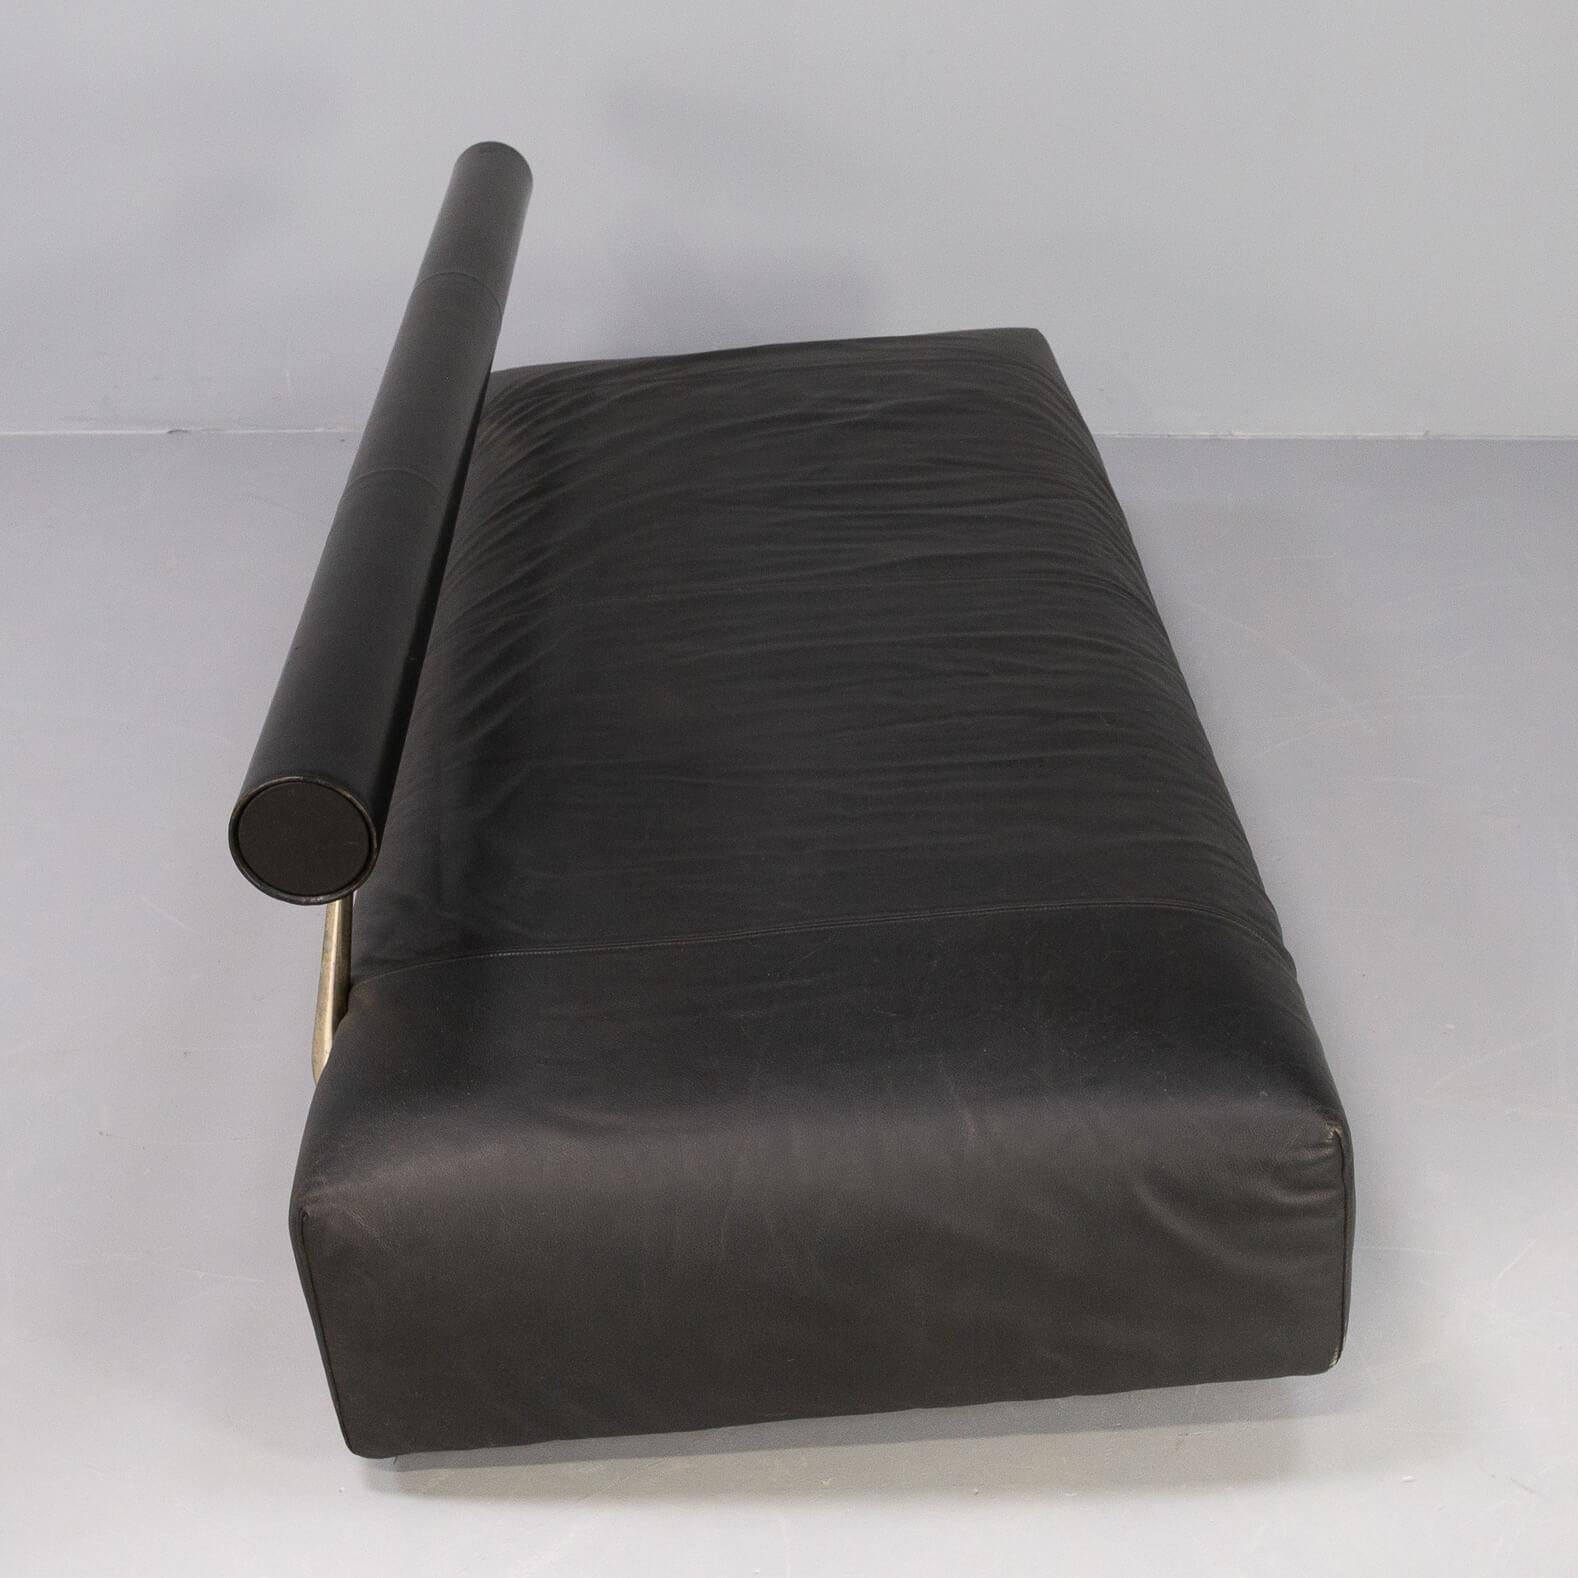 80s Antonio Citterio Rare ‘Sity’ Sofa Daybed for B&B Italia In Good Condition For Sale In Amstelveen, Noord